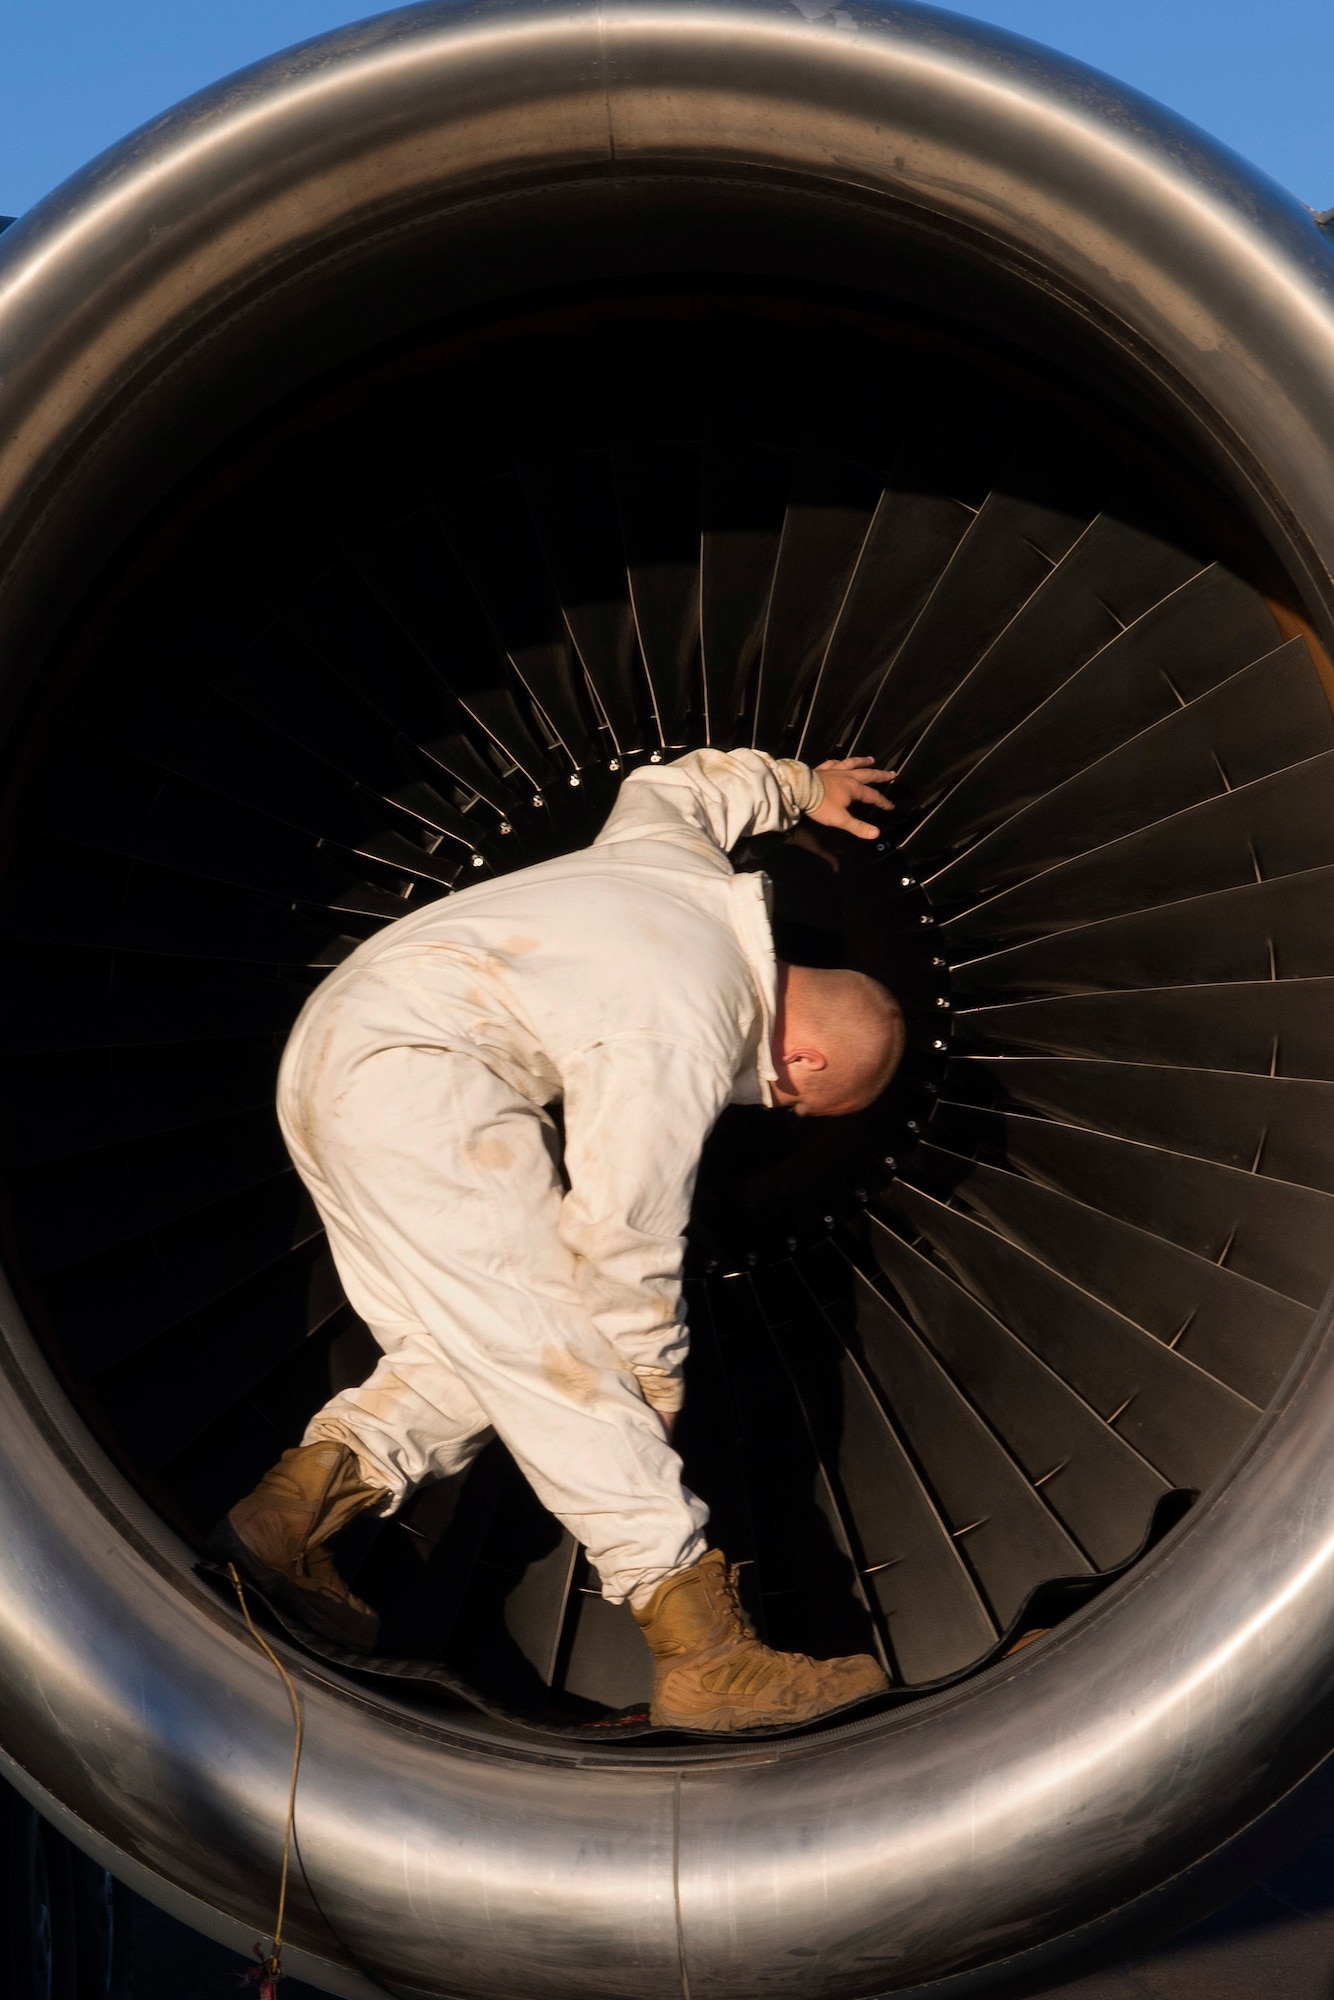 U.S. Air Force Staff Sgt.Ty Steinhausen, 605th Aircraft Maintenance Squadron, Joint Base McGuire-Dix-Lakehurst, New Jersey, performs routine maintenance checks on one of three turbine engines of a USAF KC-10 Extender July 16, 2019, at Brisbane International Airport, Australia. The Extender arrived July 12 to support major air operations for USAF, Royal Australian Air Force and U.S. Navy aircraft operating out of RAAF Base Amberley for Exercise Talisman Sabre 19, a biannual joint operation providing effective and intense training to ensure U.S. Forces are combat ready, capable, interoperable, and deployable on short notice.  (U.S. Air Force photo by Senior Airman Elora J. Martinez)